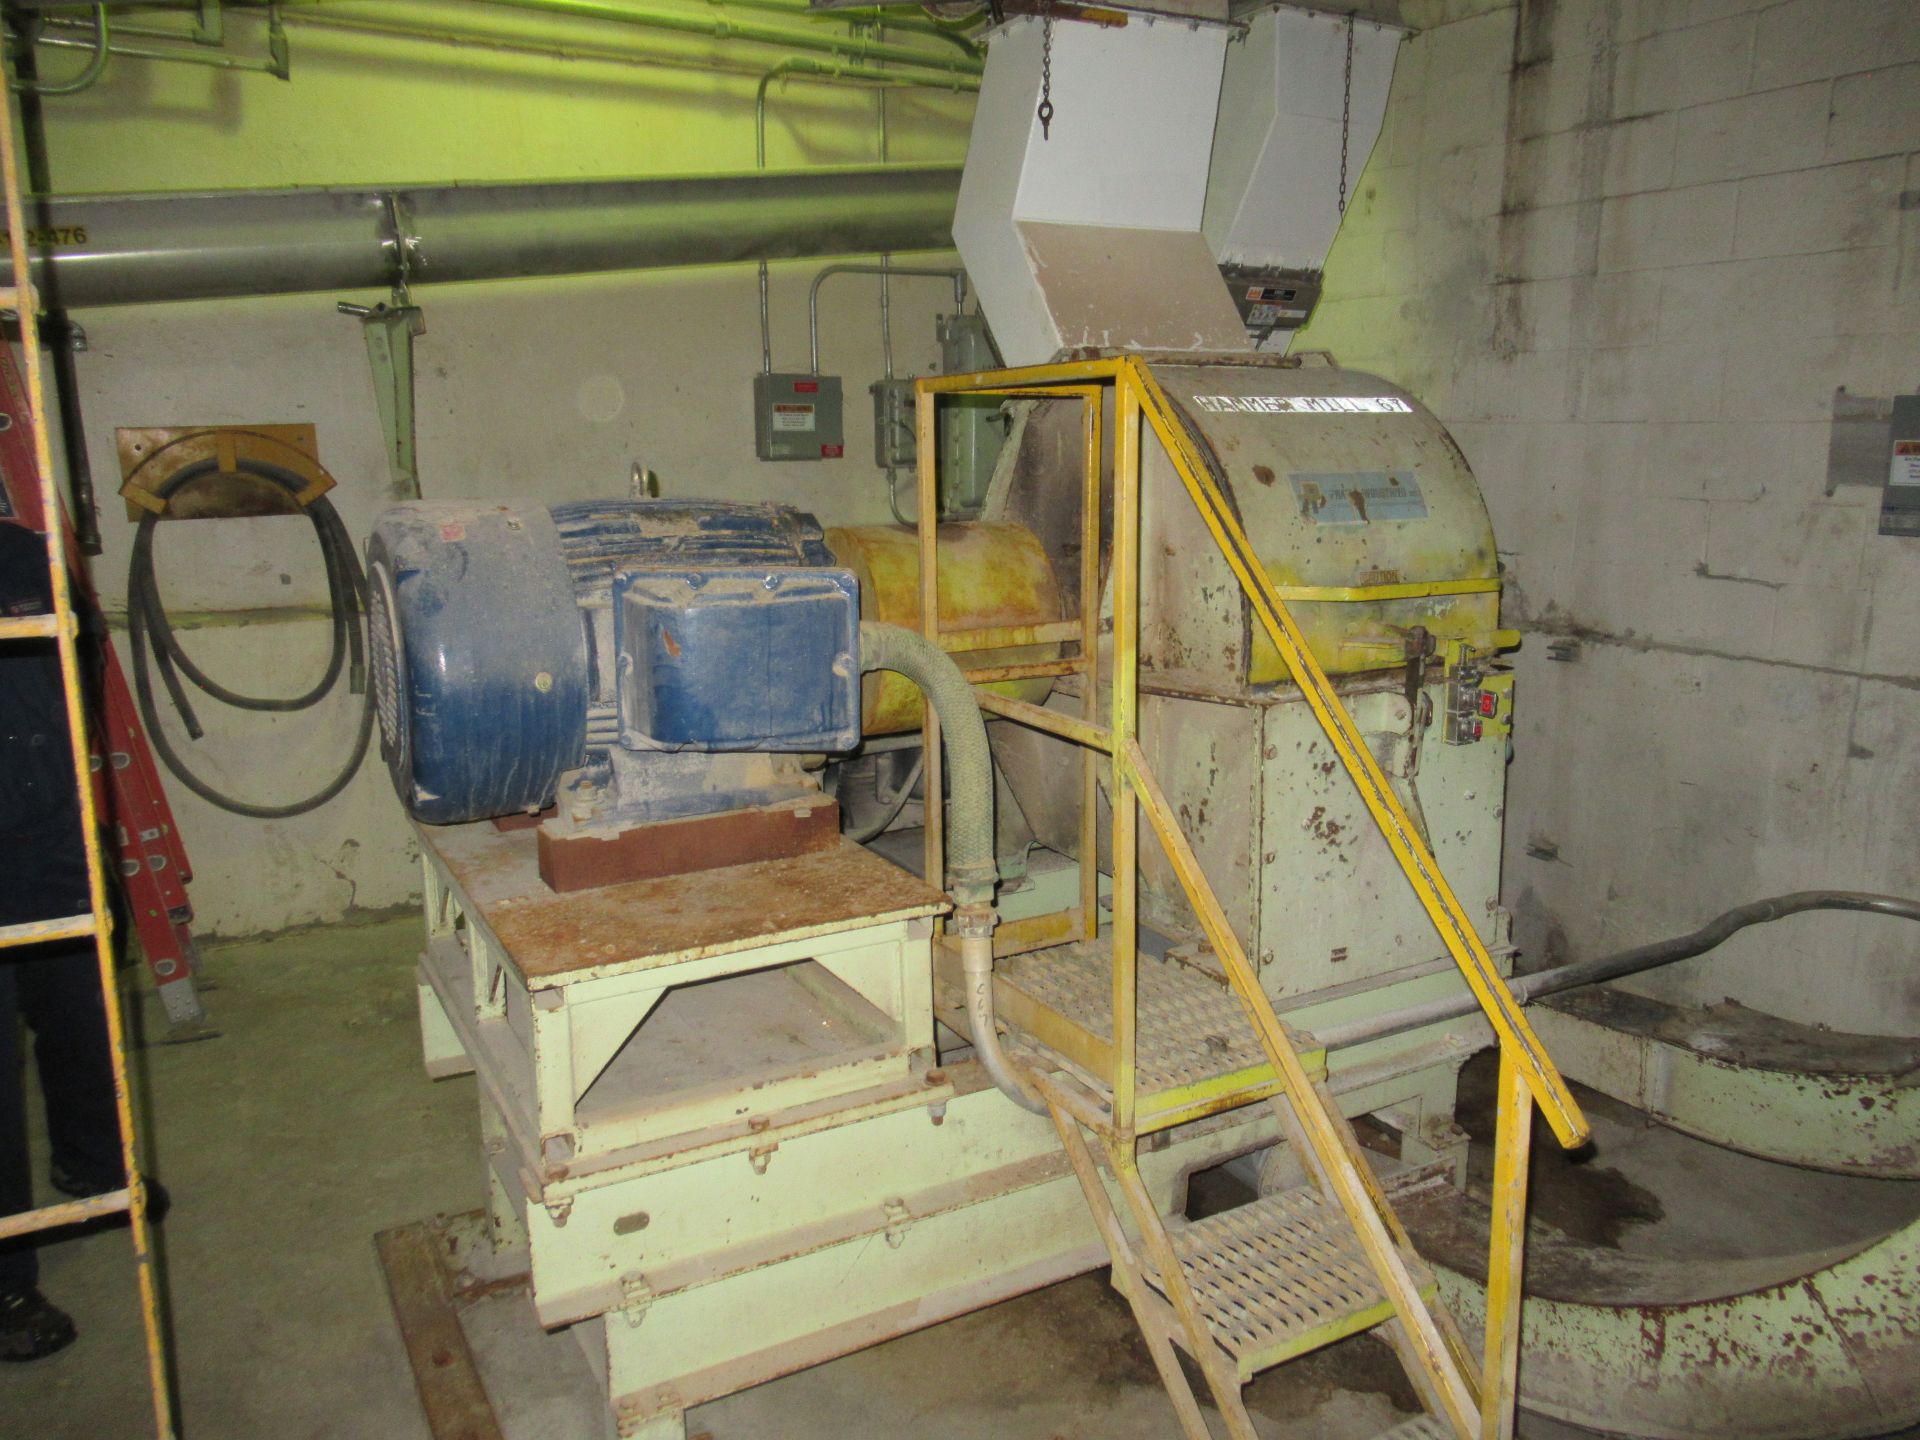 Prater hammer mill, mod G09 SF, s/n 2800, with 100 hp motor [Milling Area] - Image 2 of 3